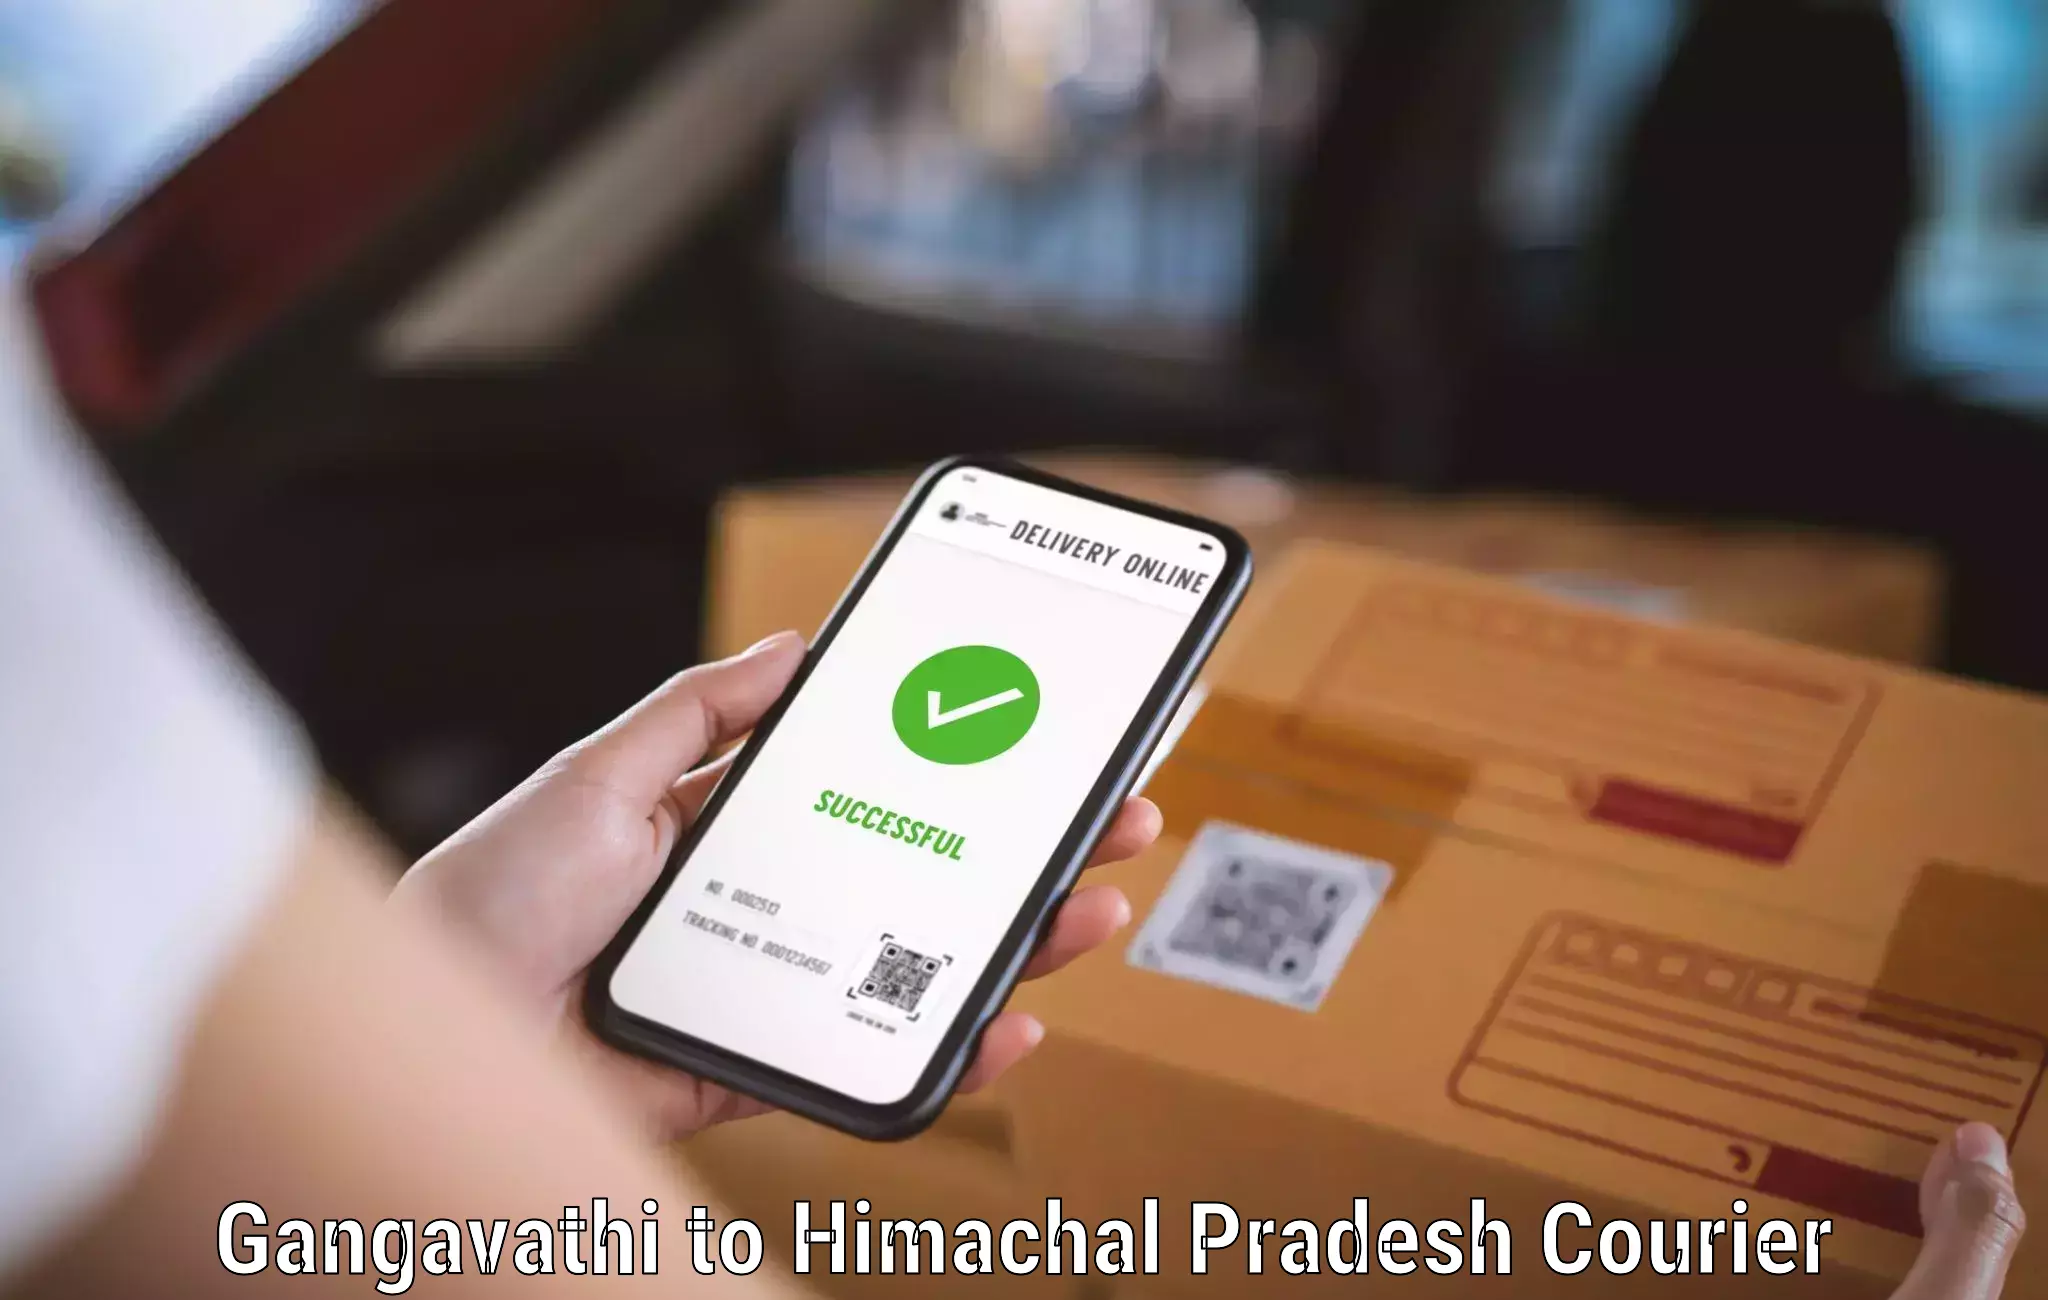 Flexible delivery schedules Gangavathi to Himachal Pradesh